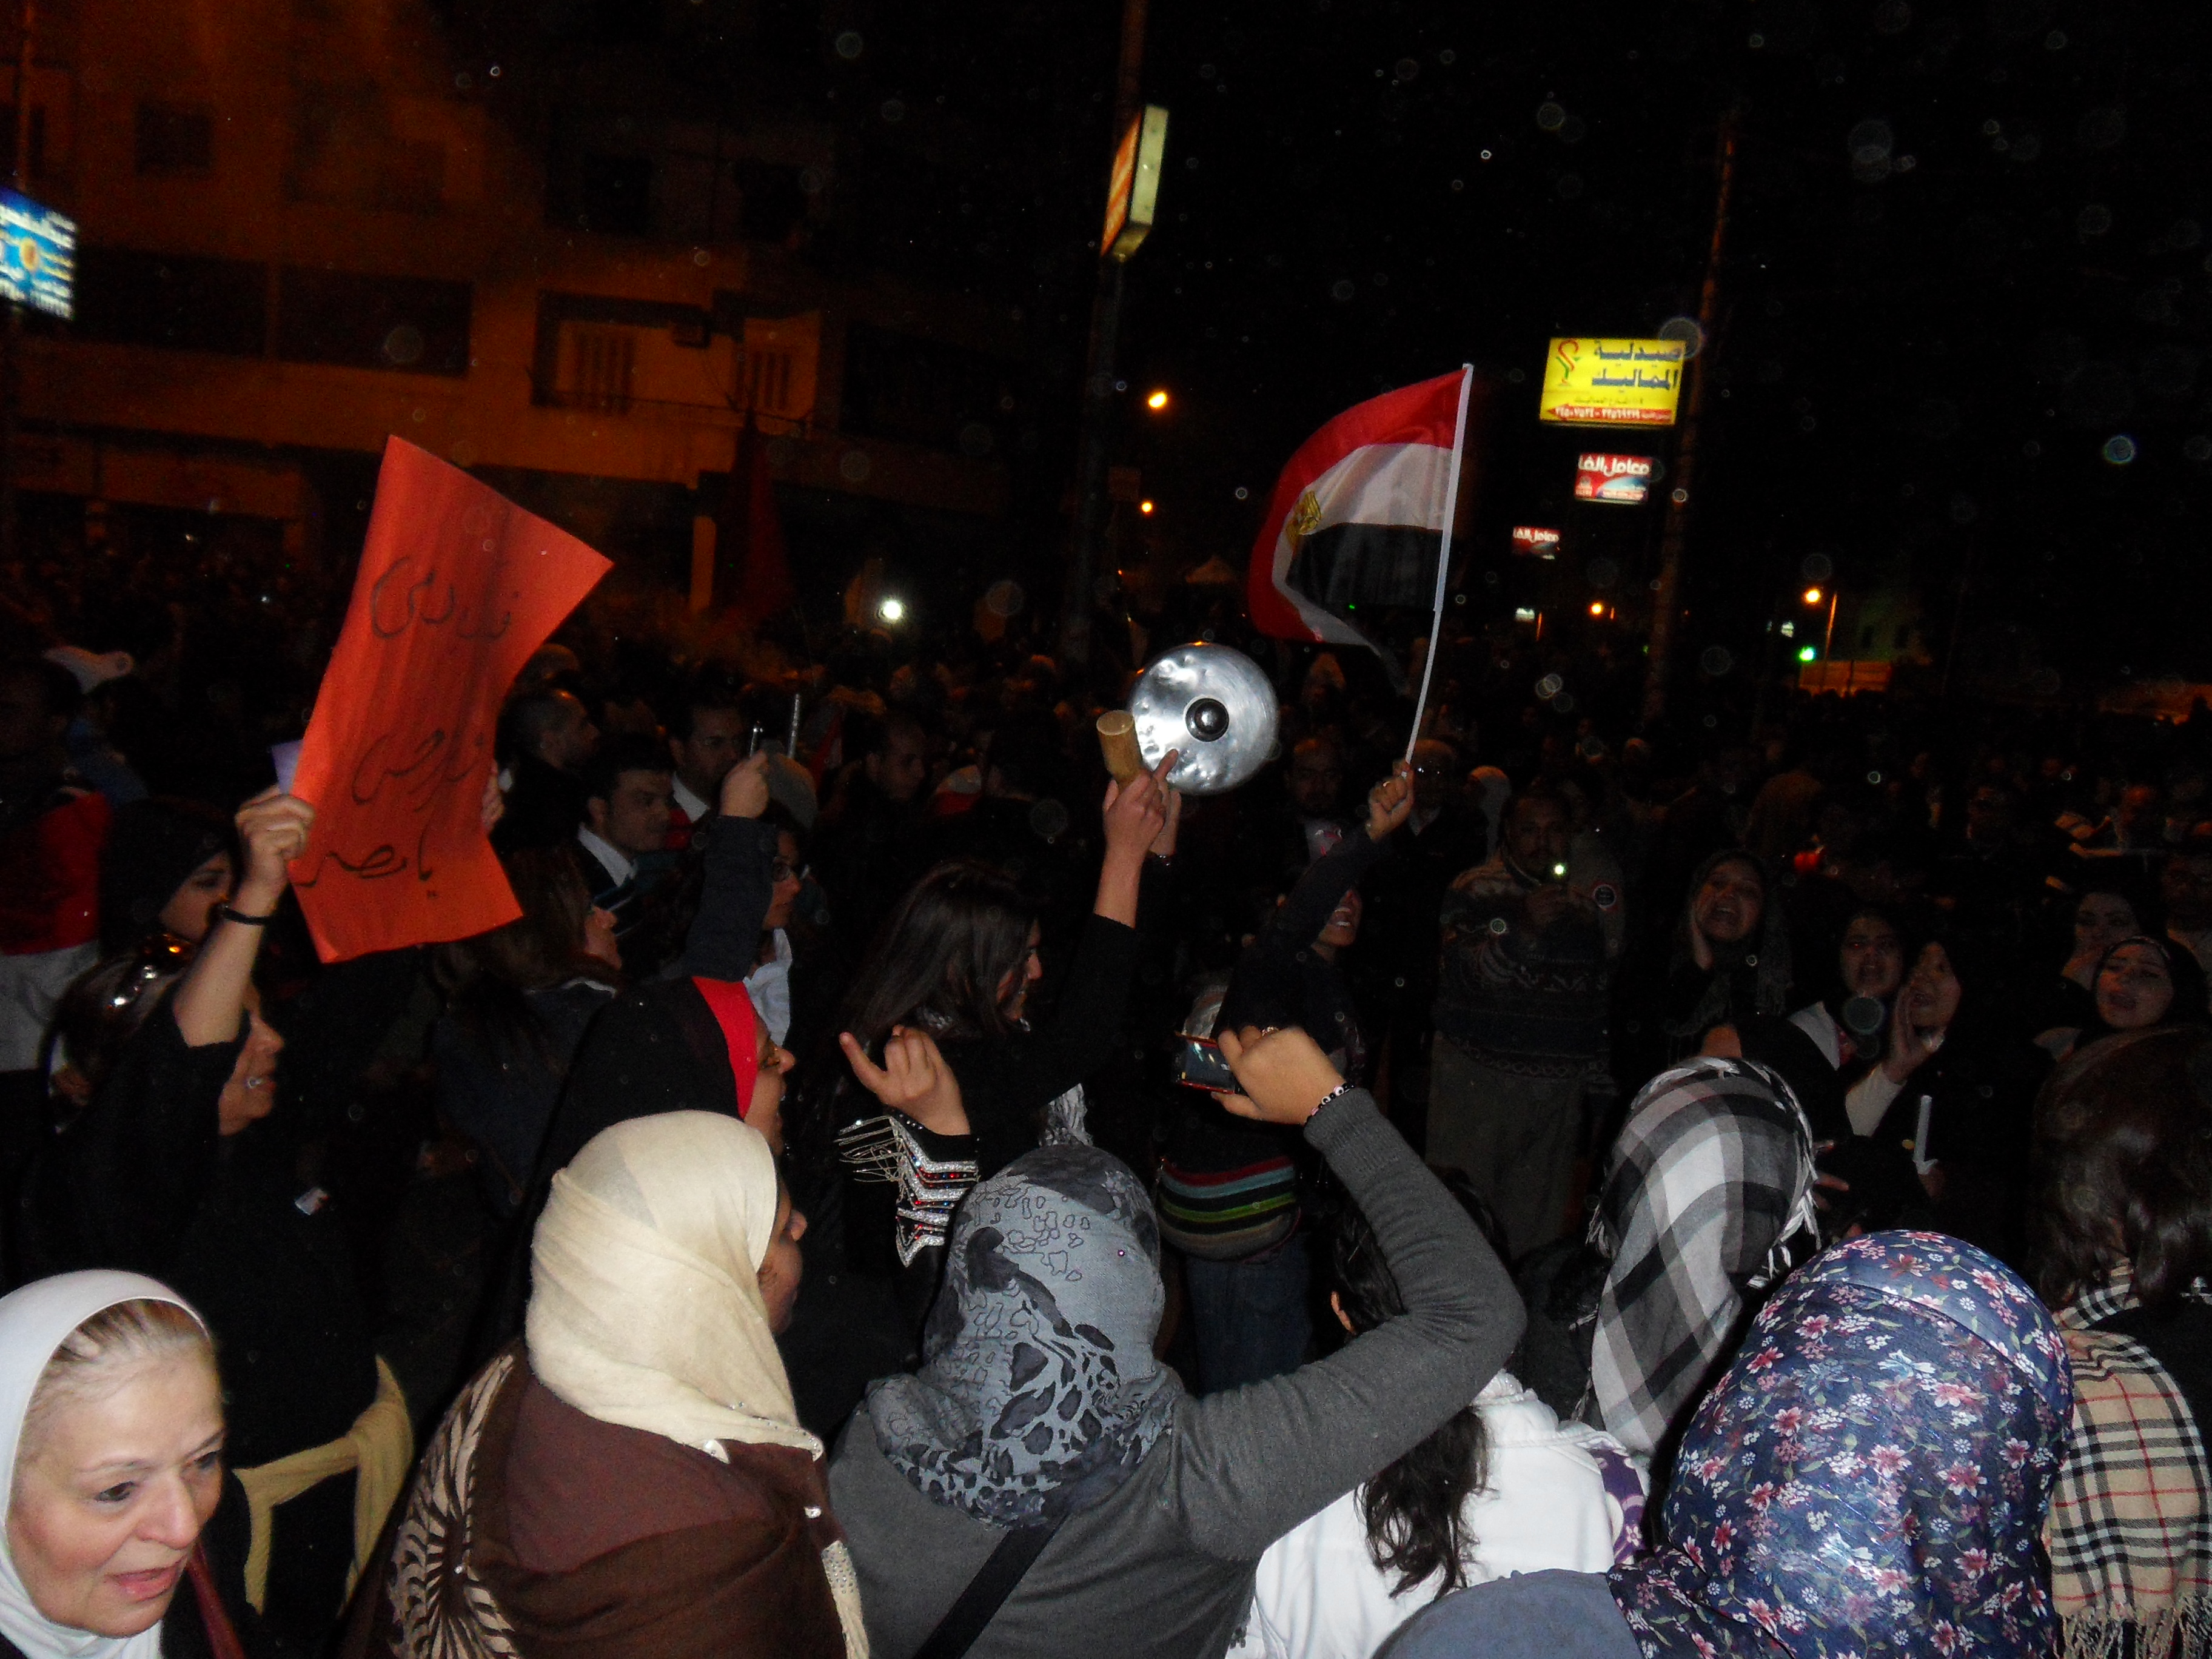 Women singing songs and chanting against Morsi.